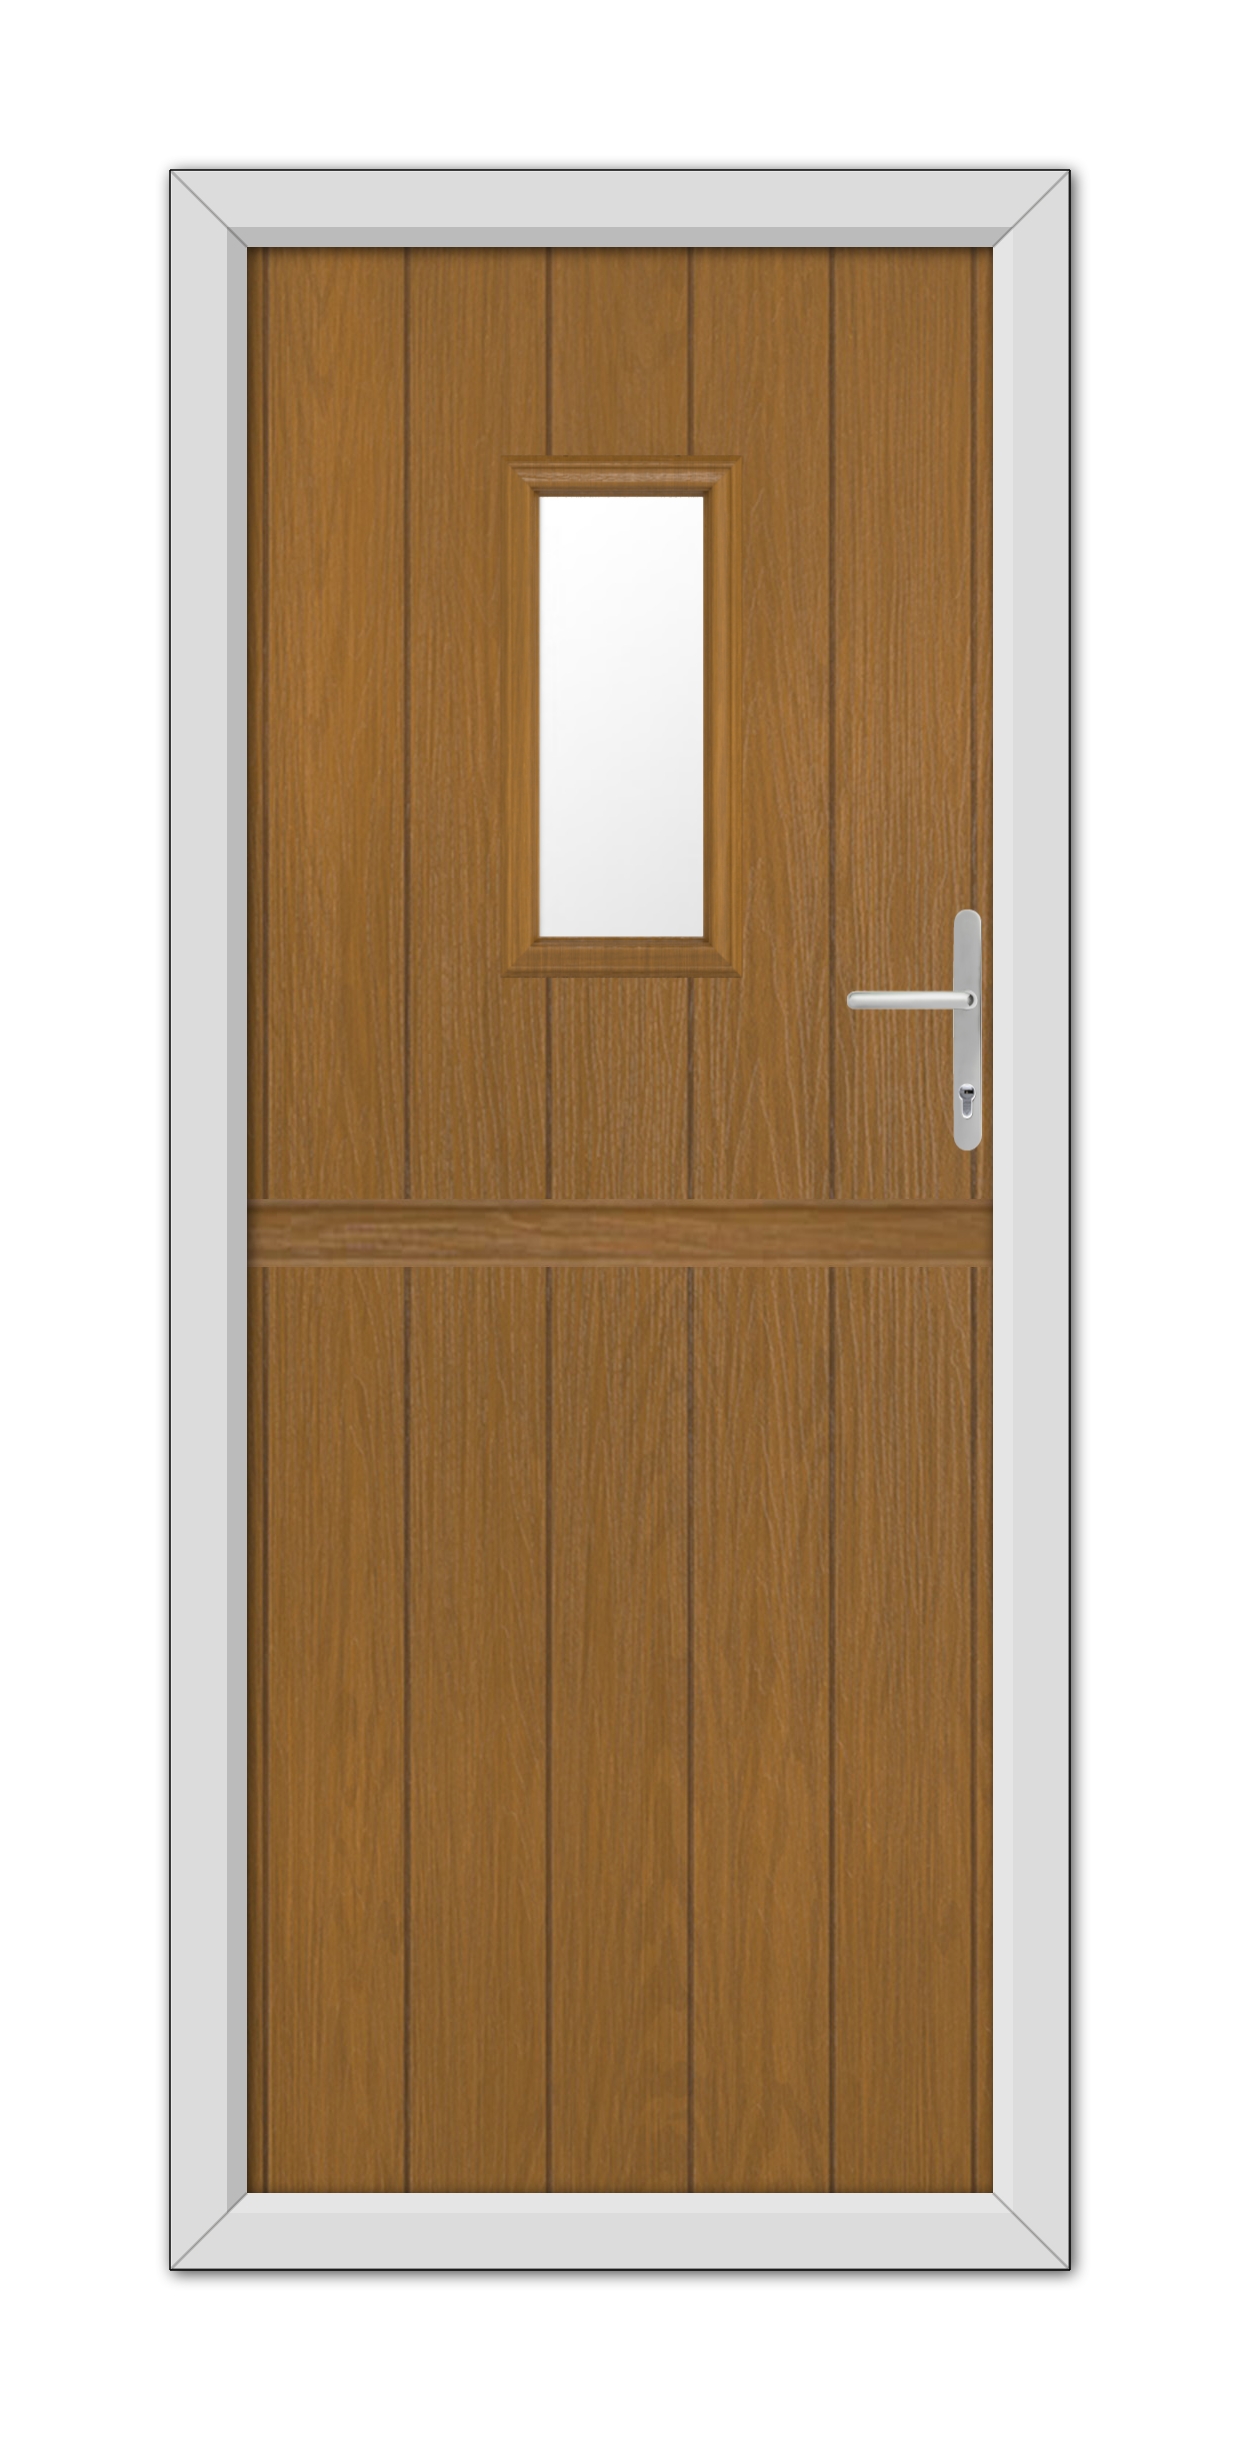 A Oak Somerset Stable Composite Door 48mm Timber Core with a small rectangular window, set within a white frame, featuring a metal handle on the right side.